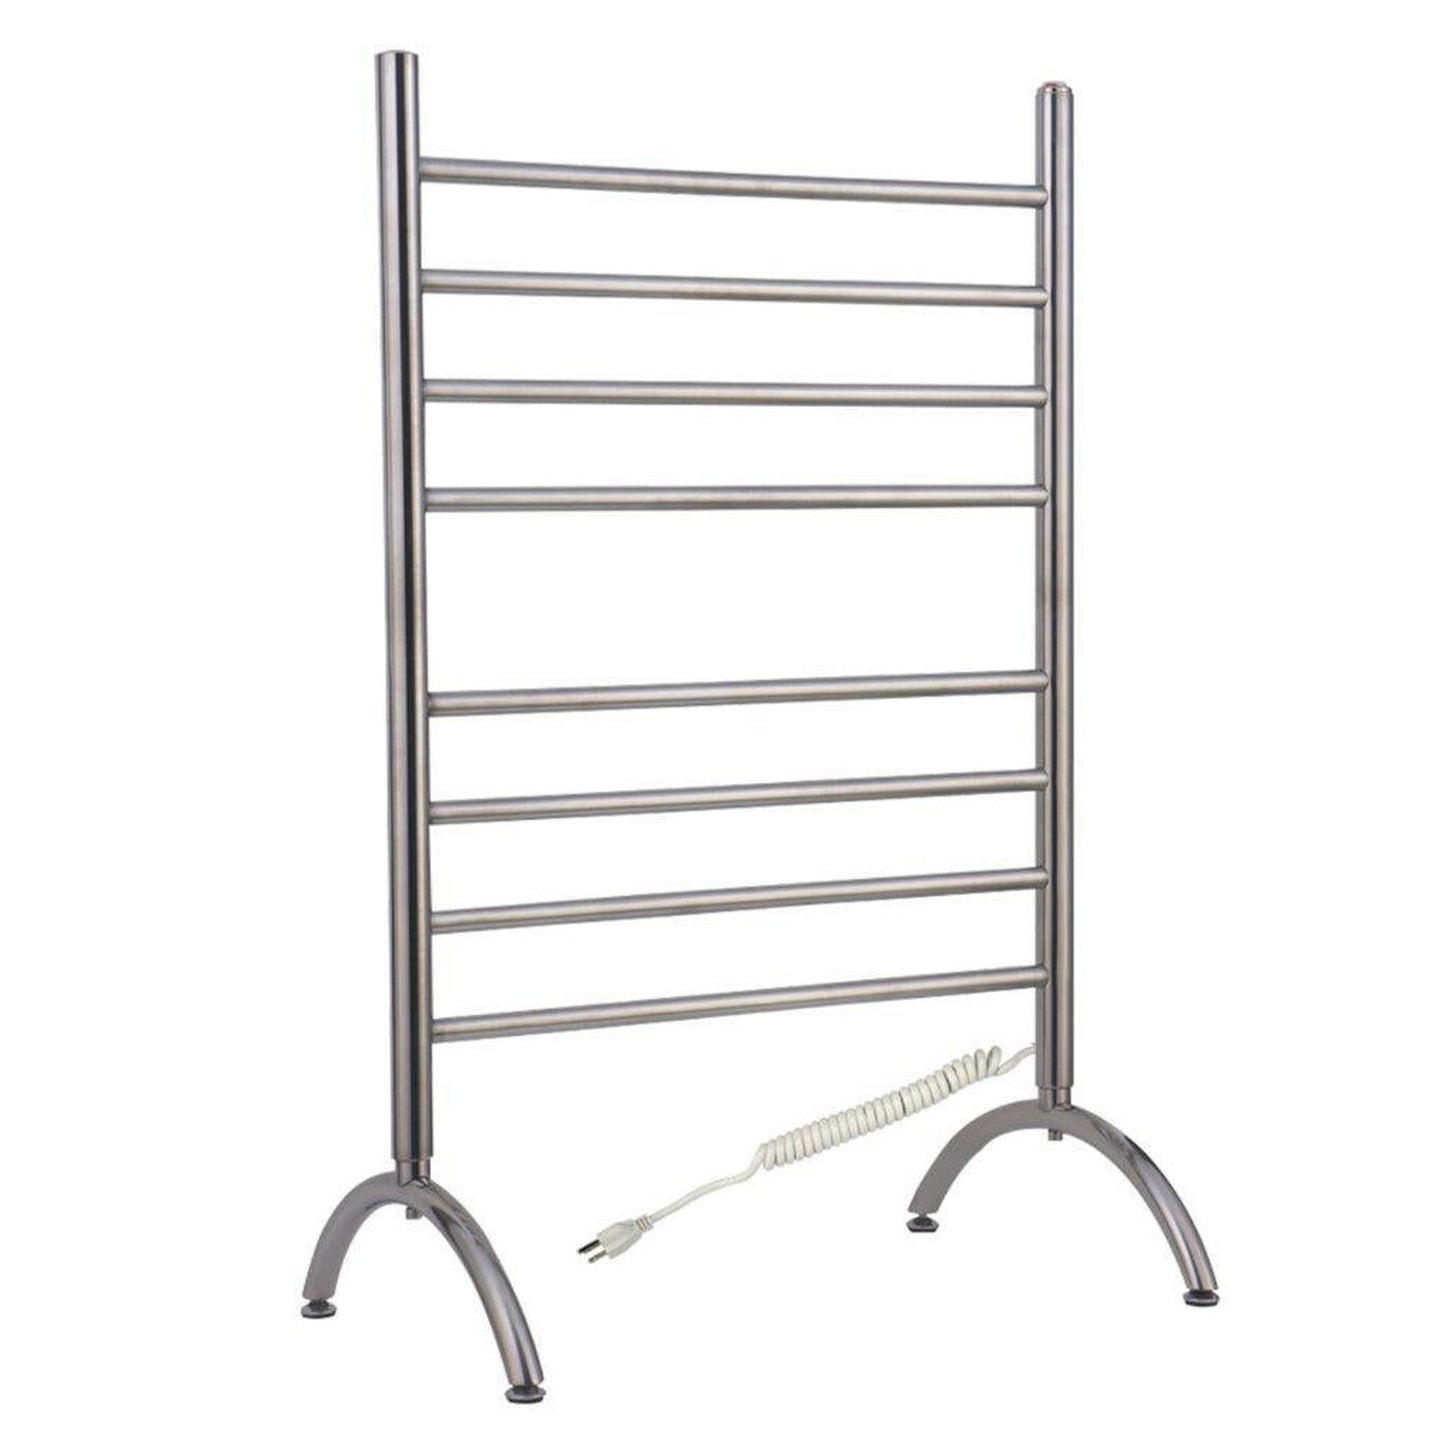 WarmlyYours Barcelona 24" x 37" Brushed Stainless Steel Wall-Mounted 8-Bar Plug-In Towel Warmer